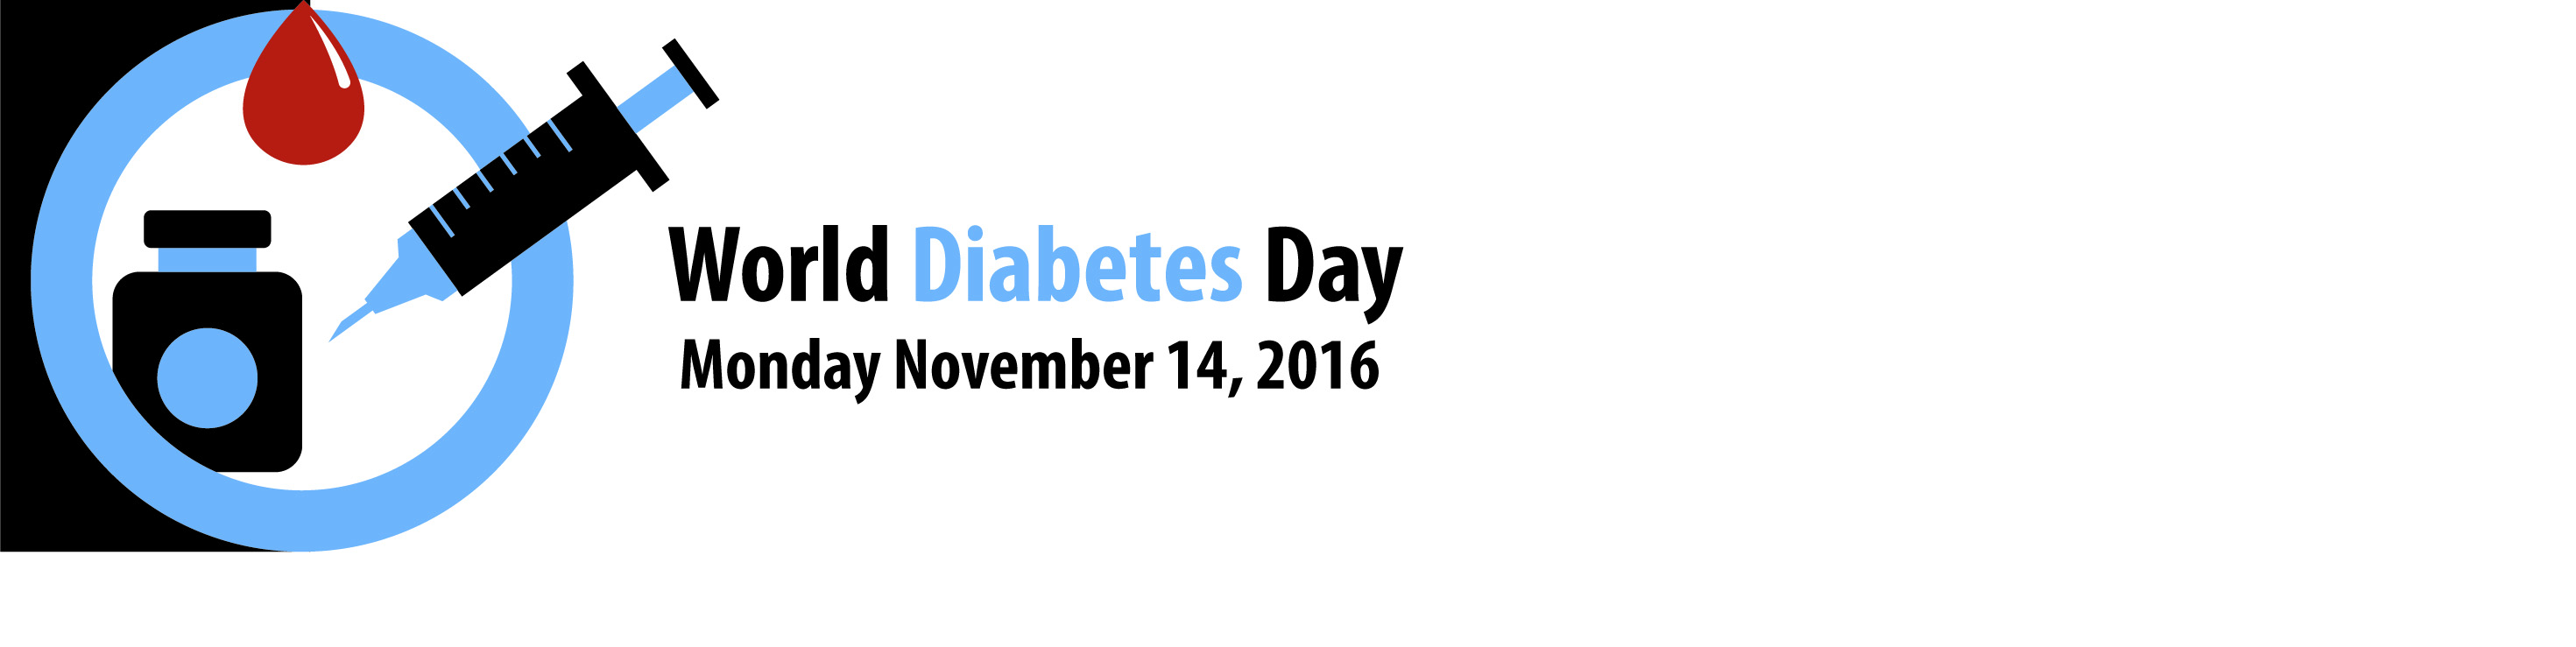 MNCFN World Diabetes Day Event